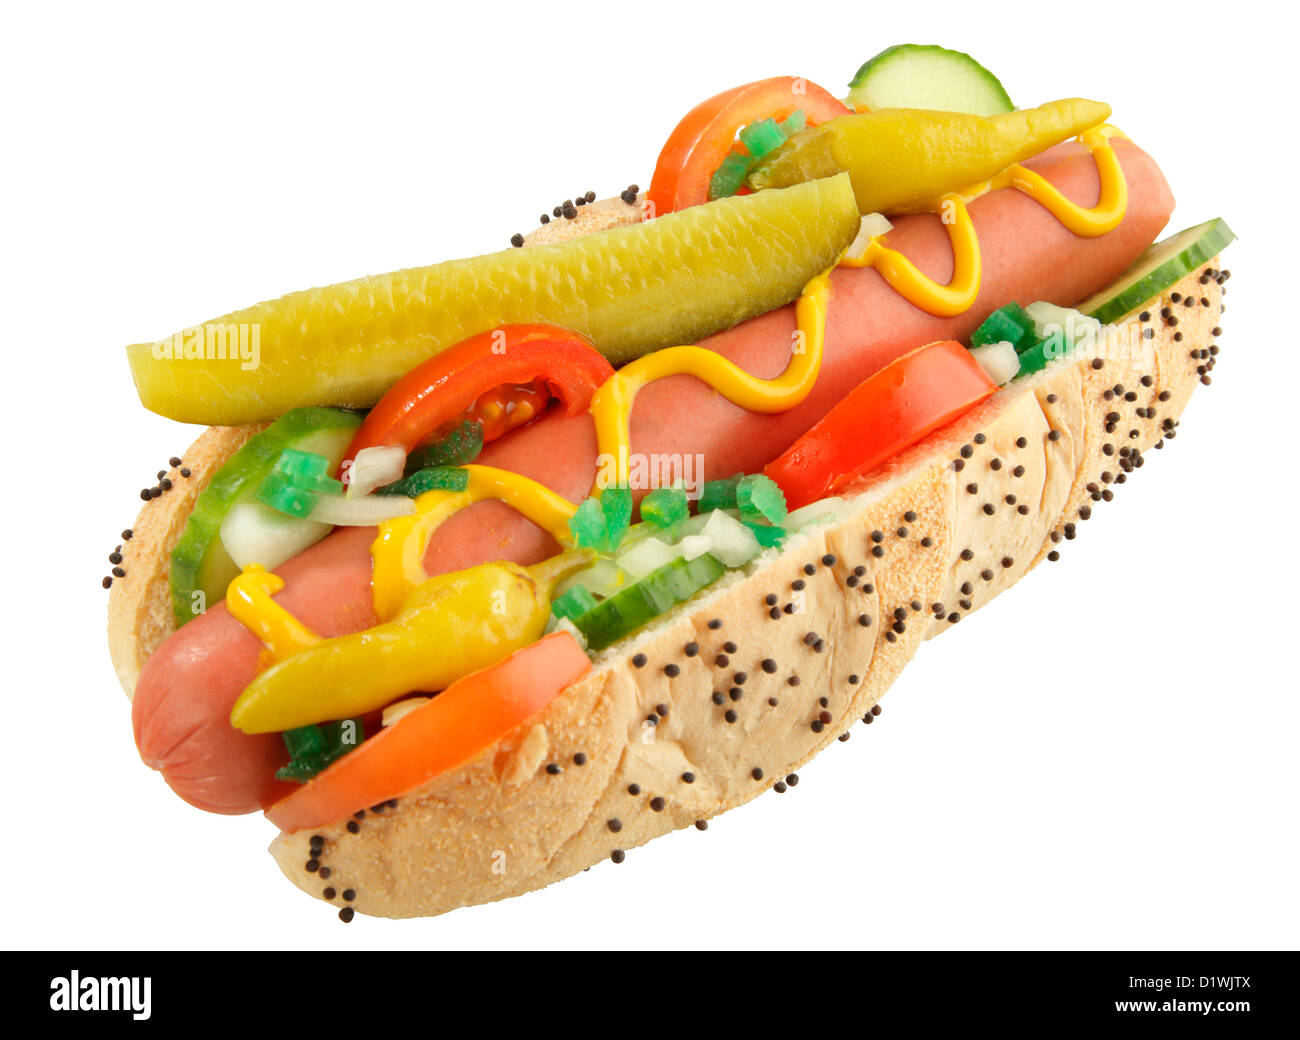 CUT OUT OF CHICAGO STYLE HOT DOG Stock Photo